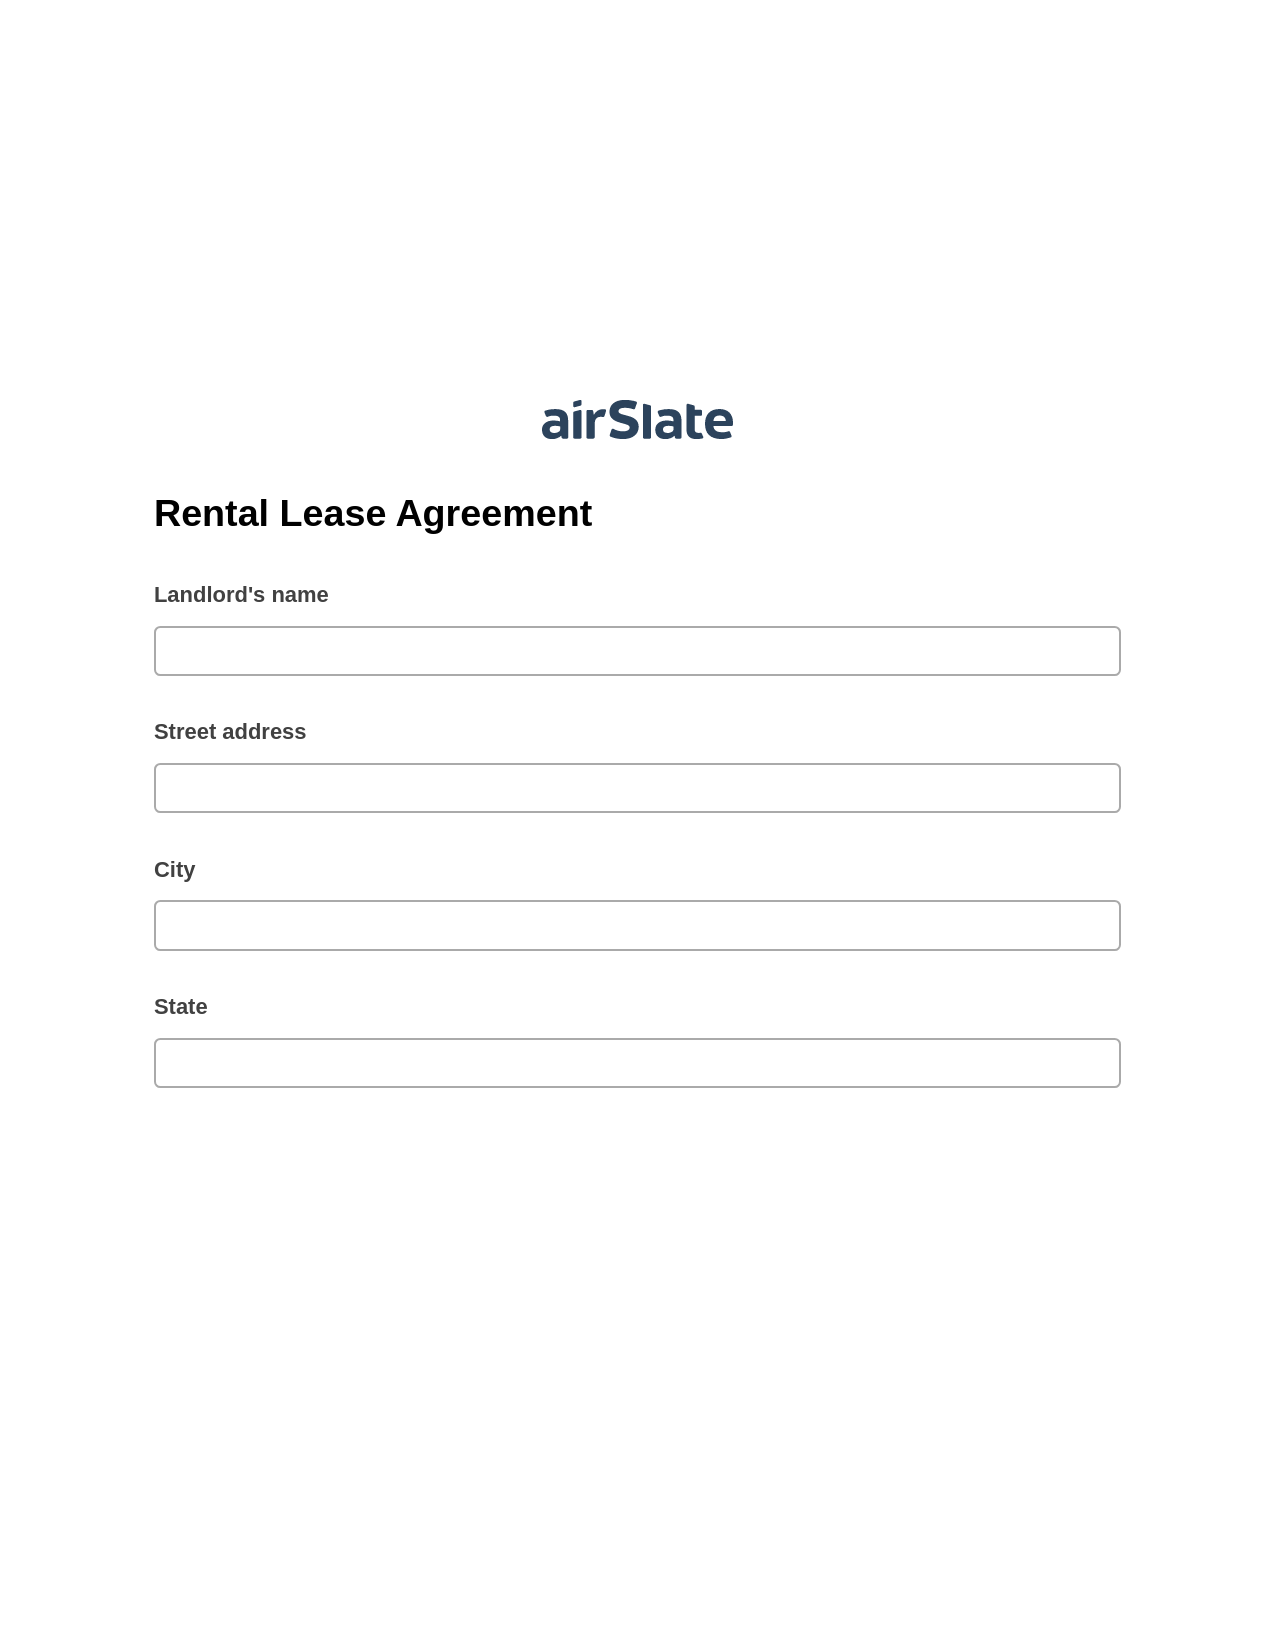 Multirole Rental Lease Agreement Pre-fill from CSV File Dropdown Options Bot, Assign Roles to Recipients Bot, Export to Google Sheet Bot